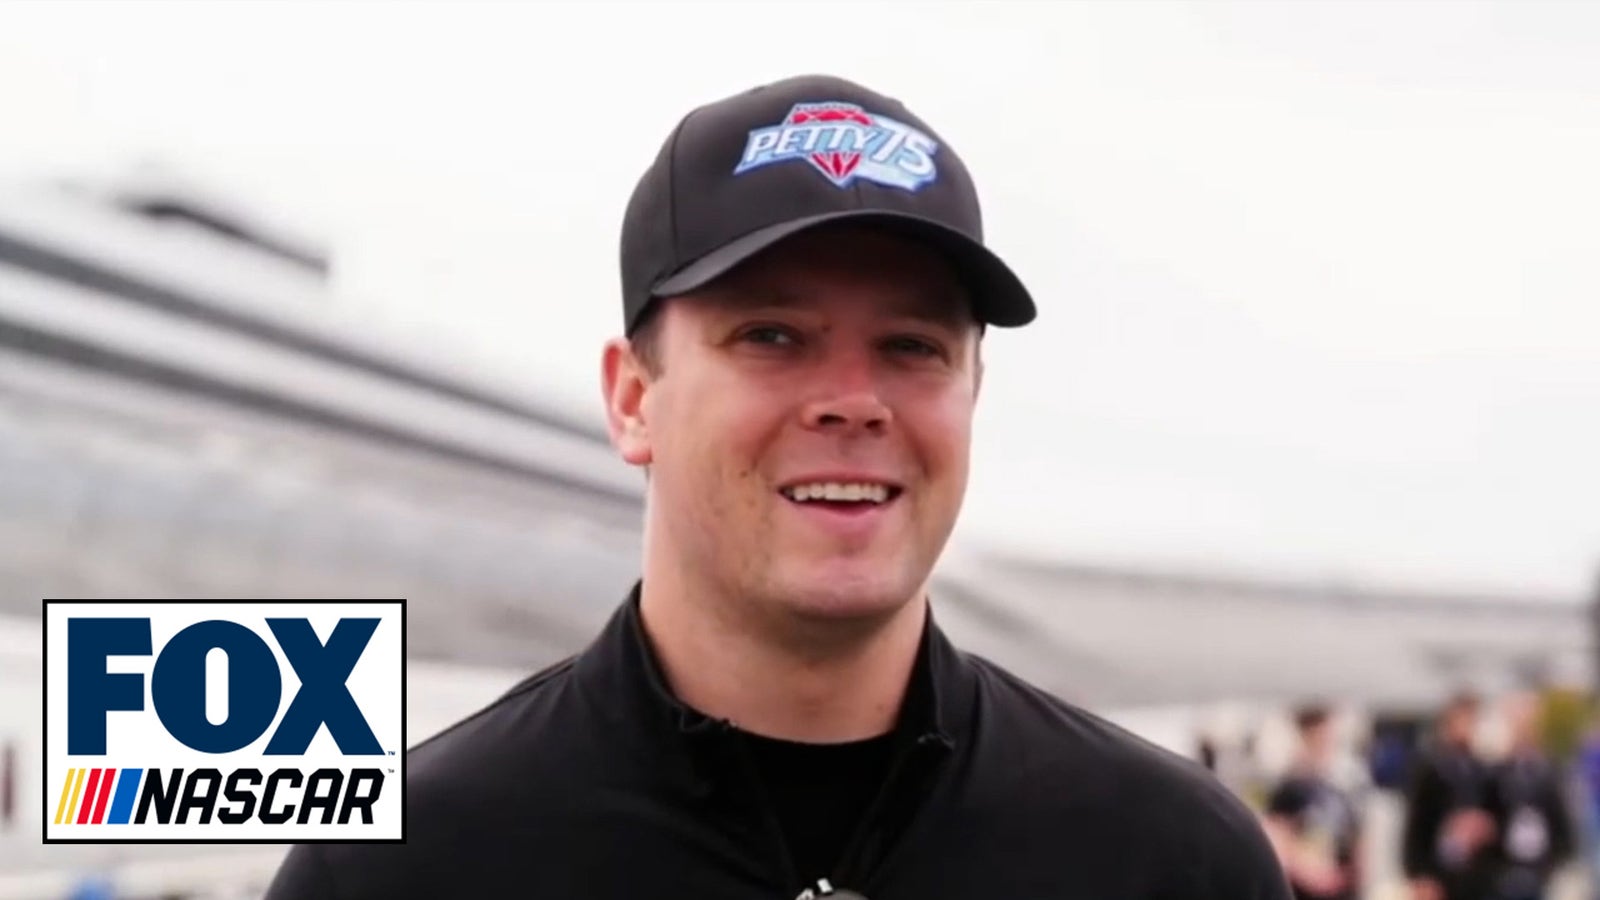 Erik Jones shares thoughts on his accident, injury and missing races